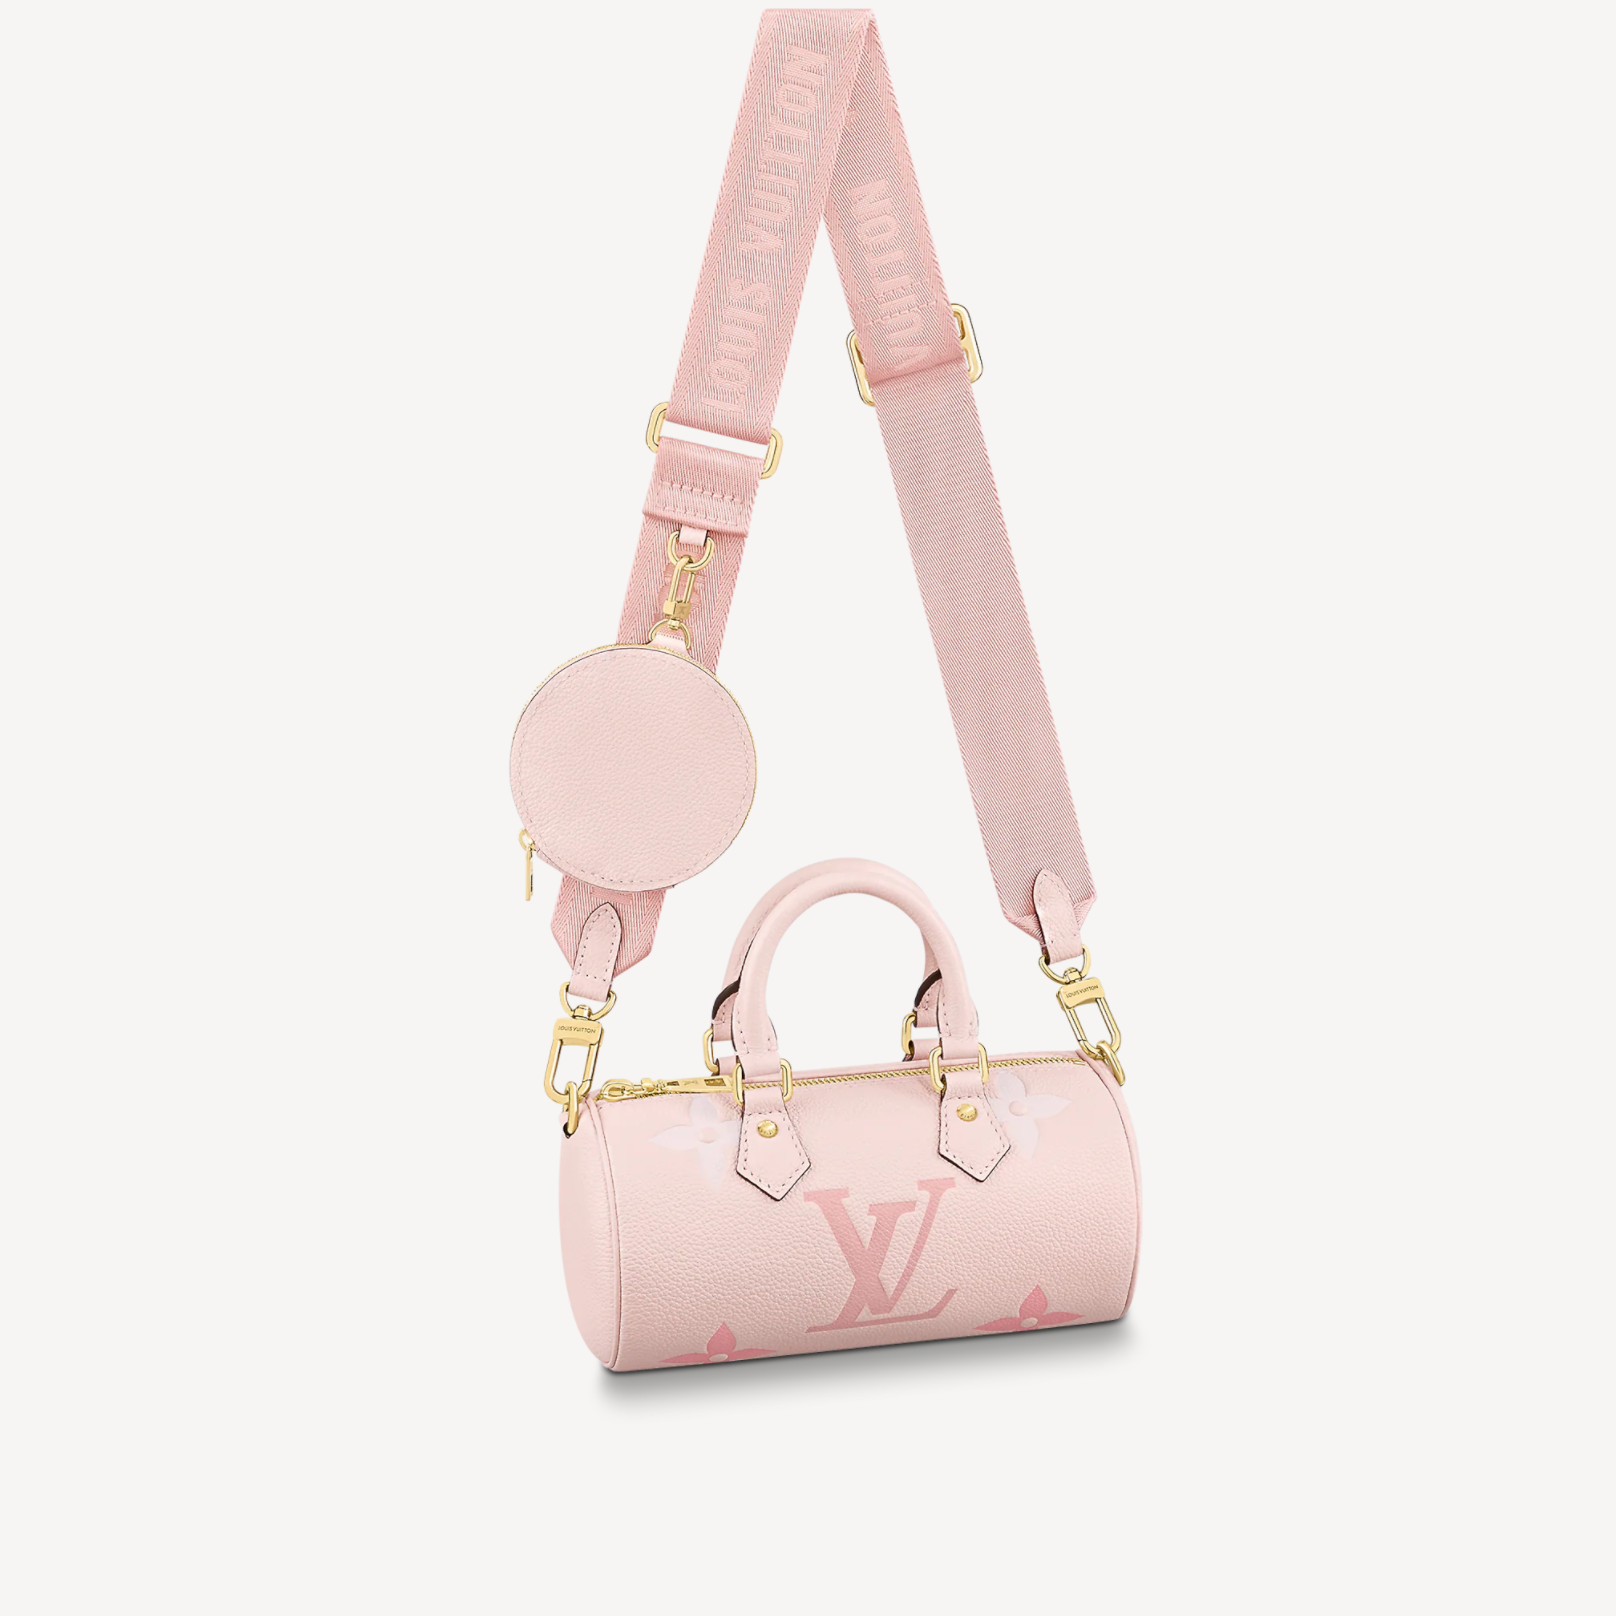 louis vuitton purse with pink